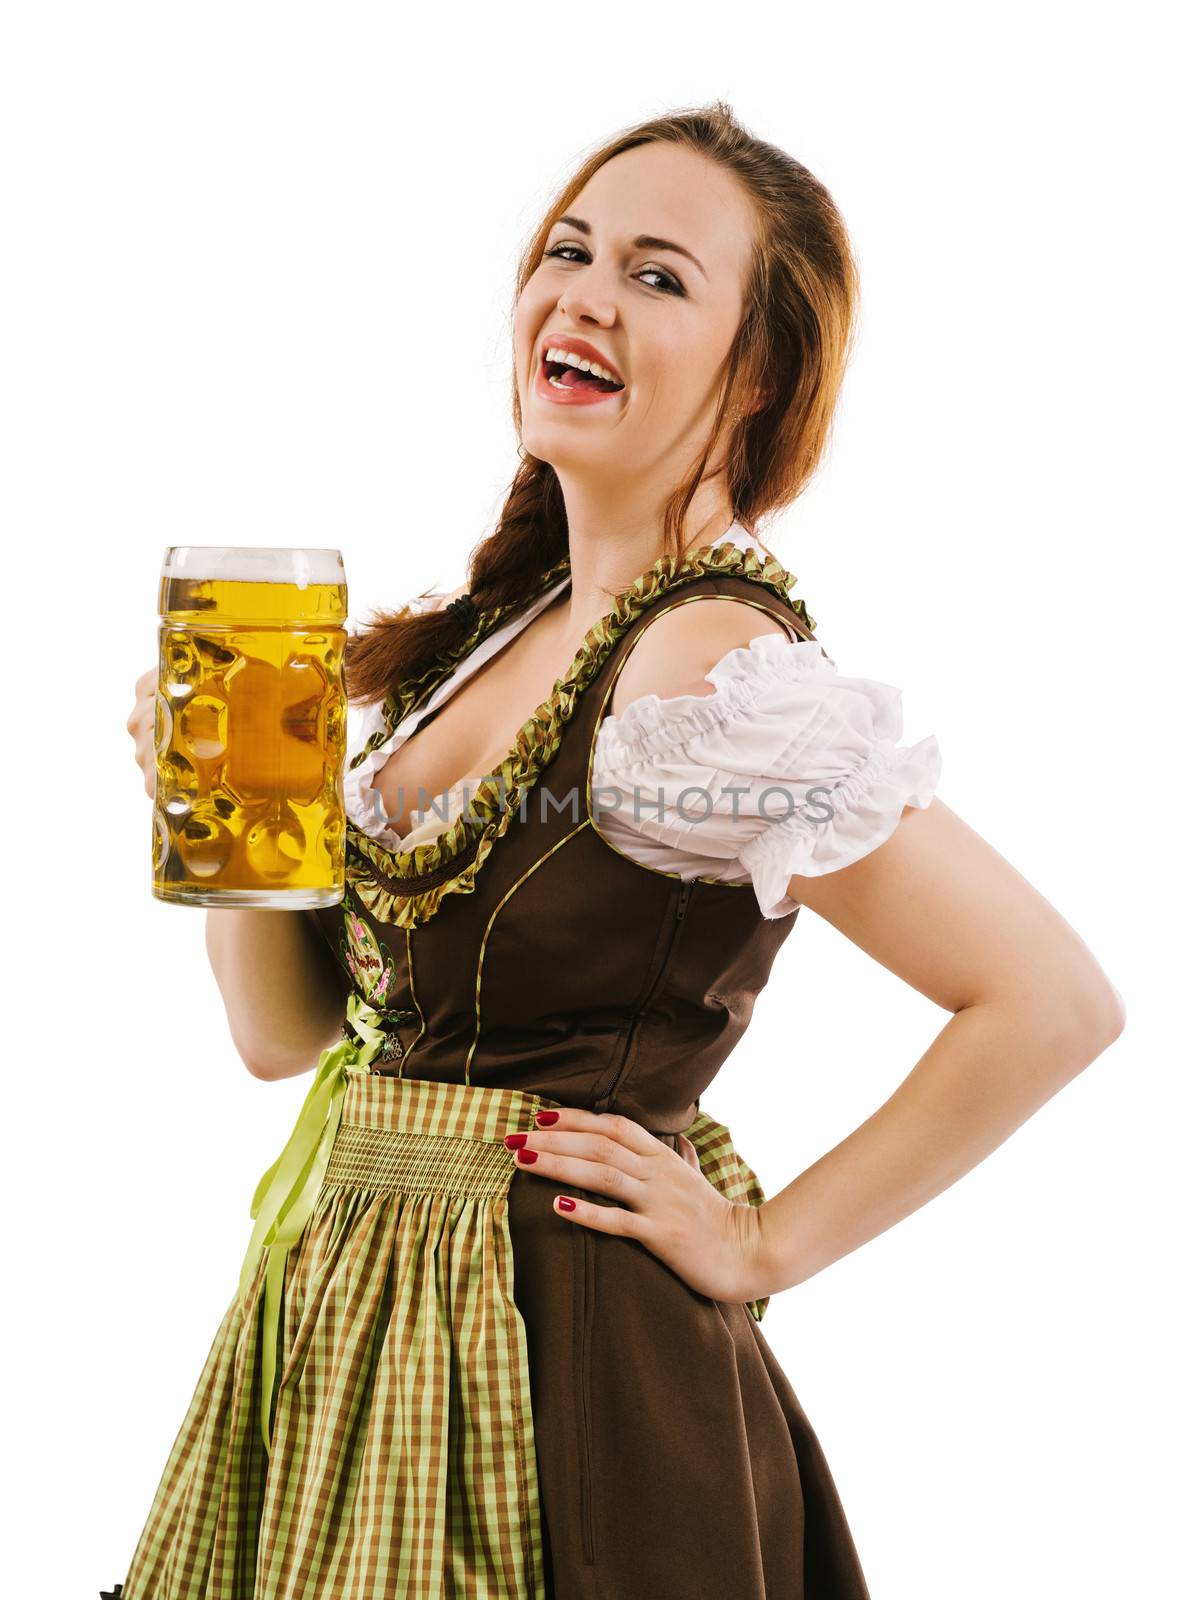 Photo of a beautiful happy woman wearing traditional dirndl, laughing and holding a huge beer.
